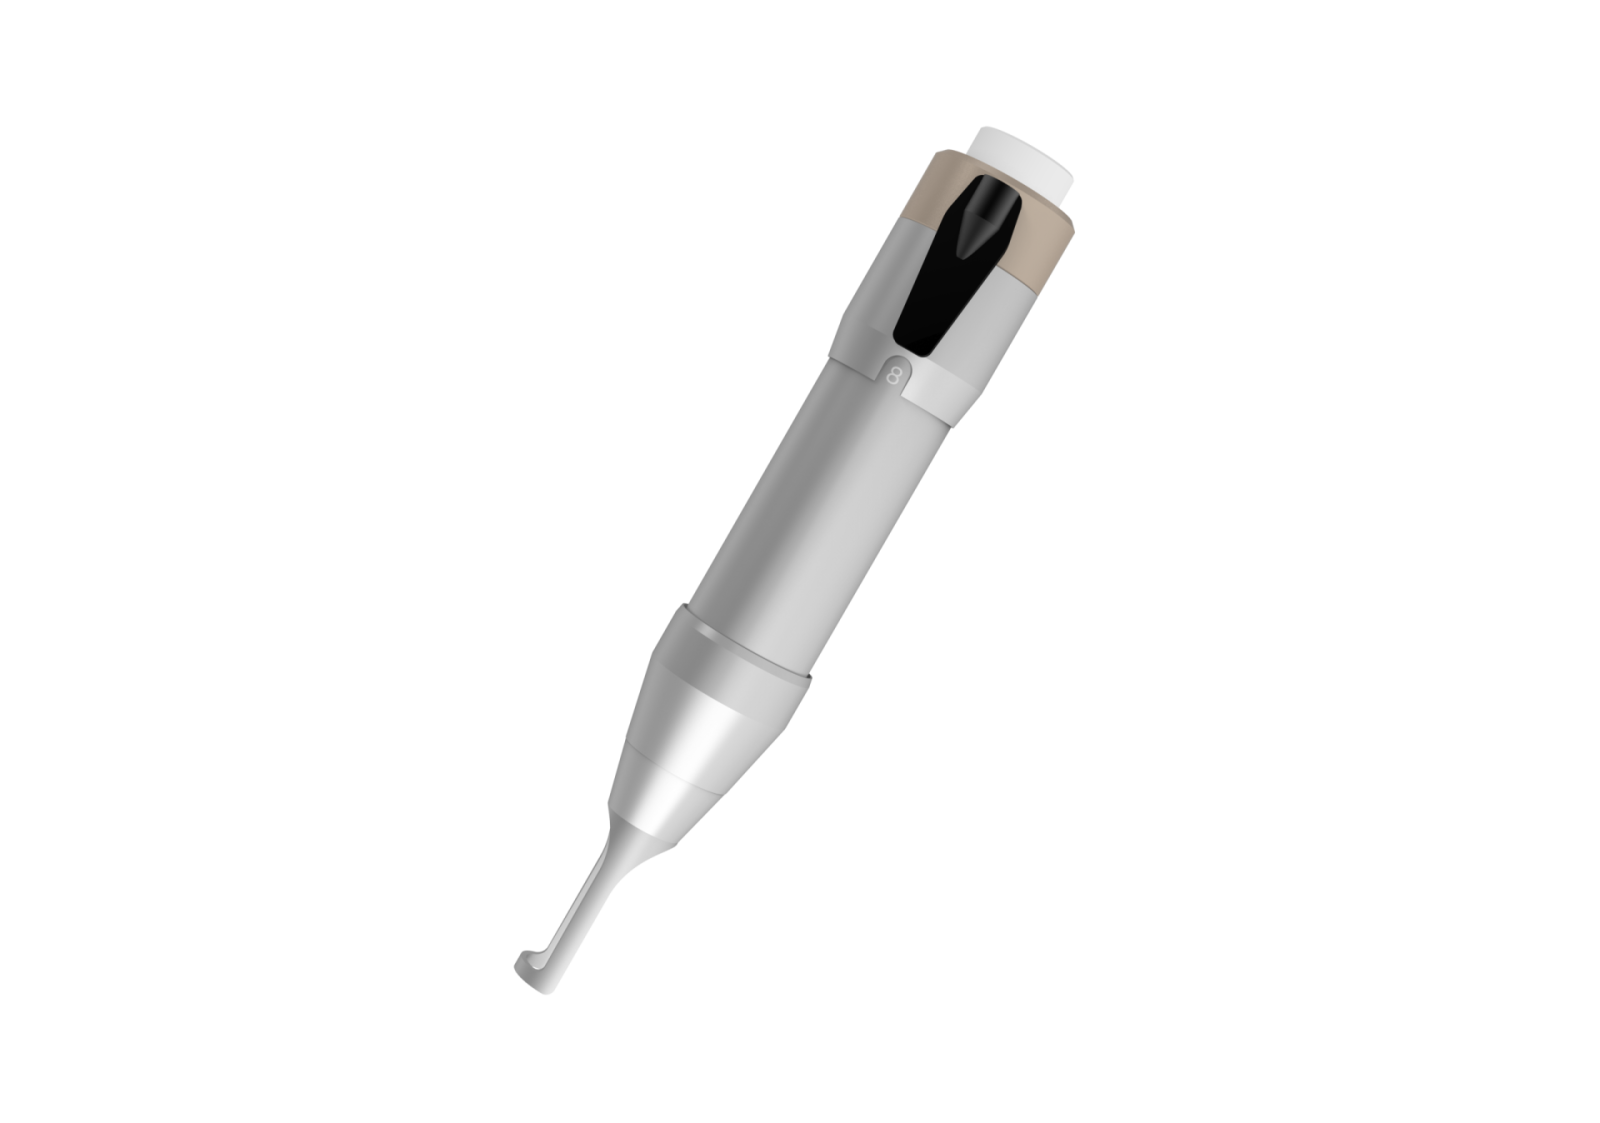 Collimated handpiece